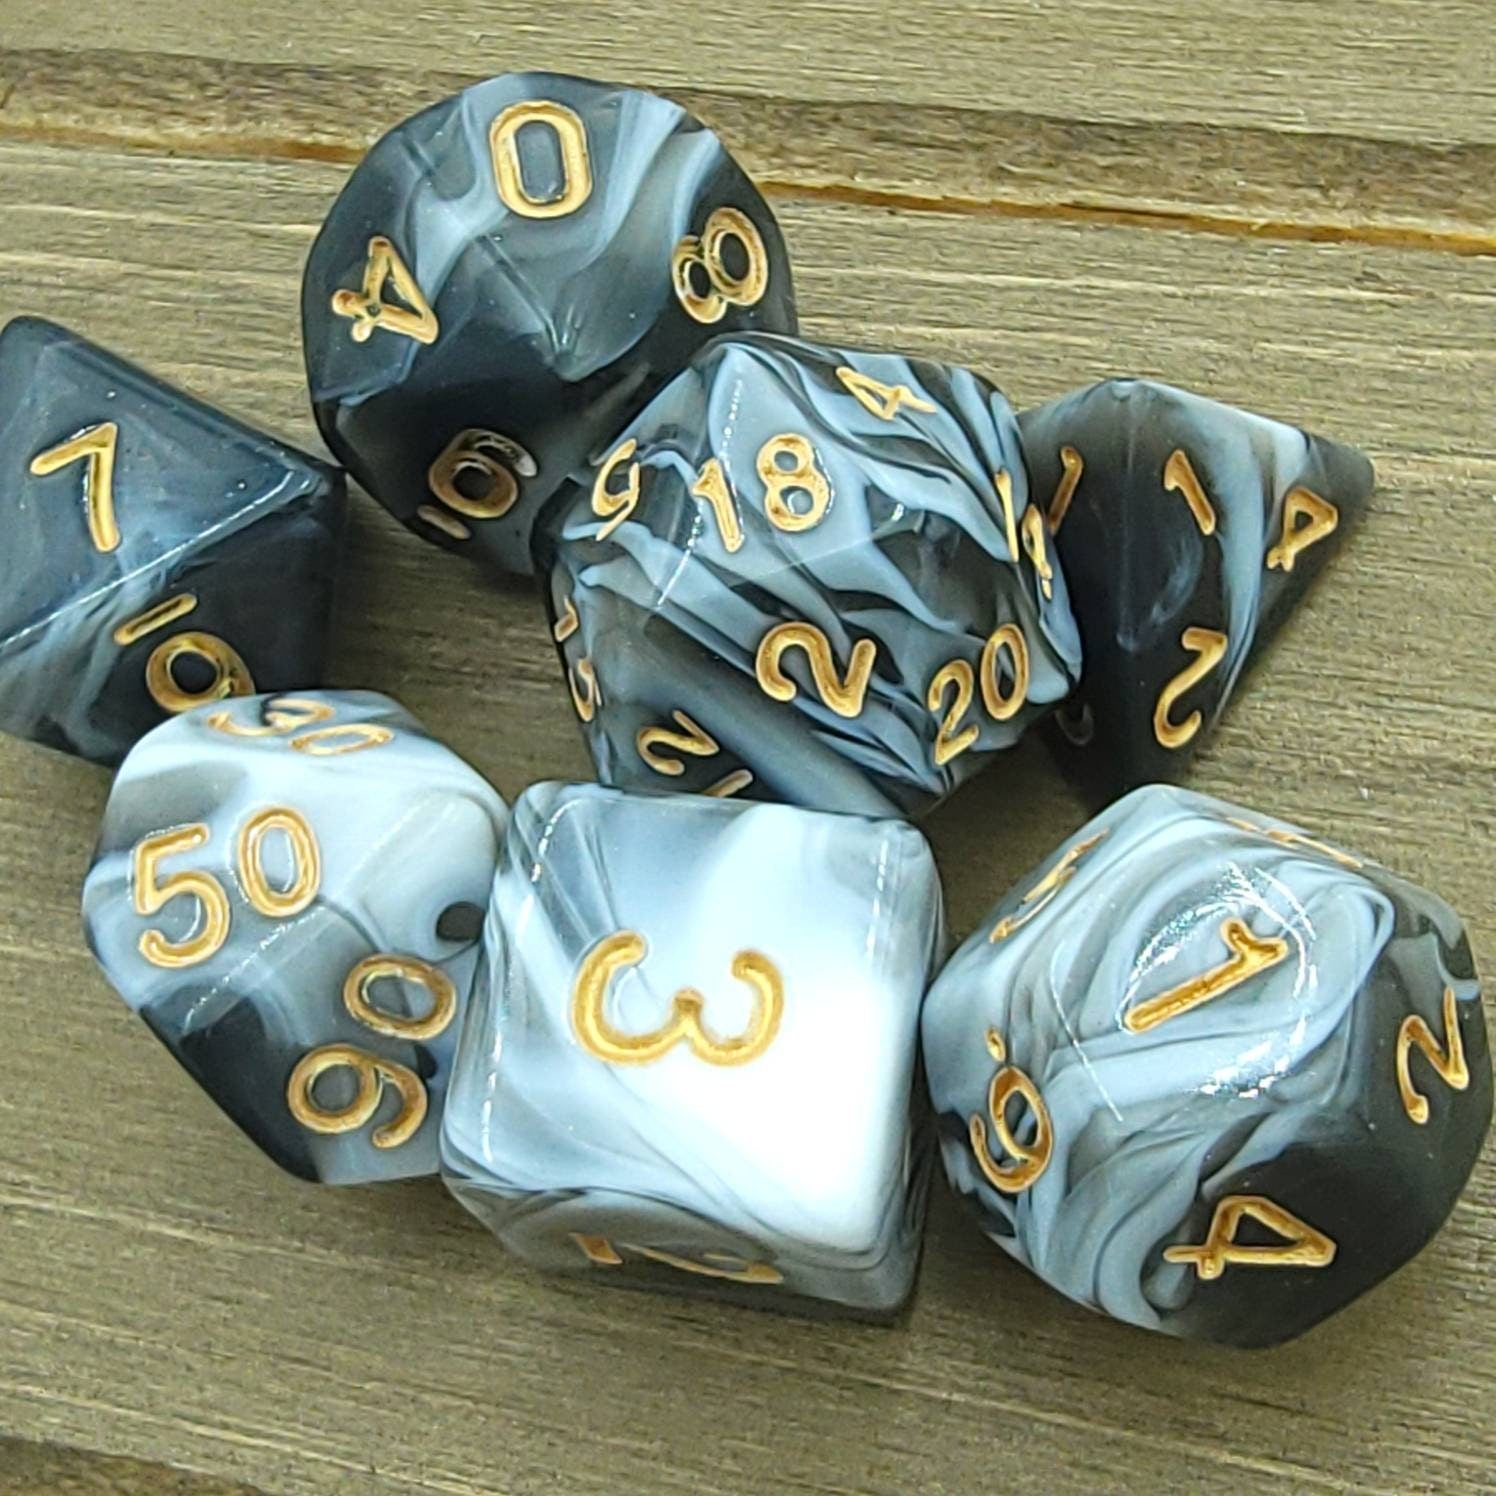 Obsidian Swirl | RPG Dice Set| RPG Dice | Polyhedral Dice Set | Dungeons and Dragons | DnD Dice Set | Gaming Dice Set